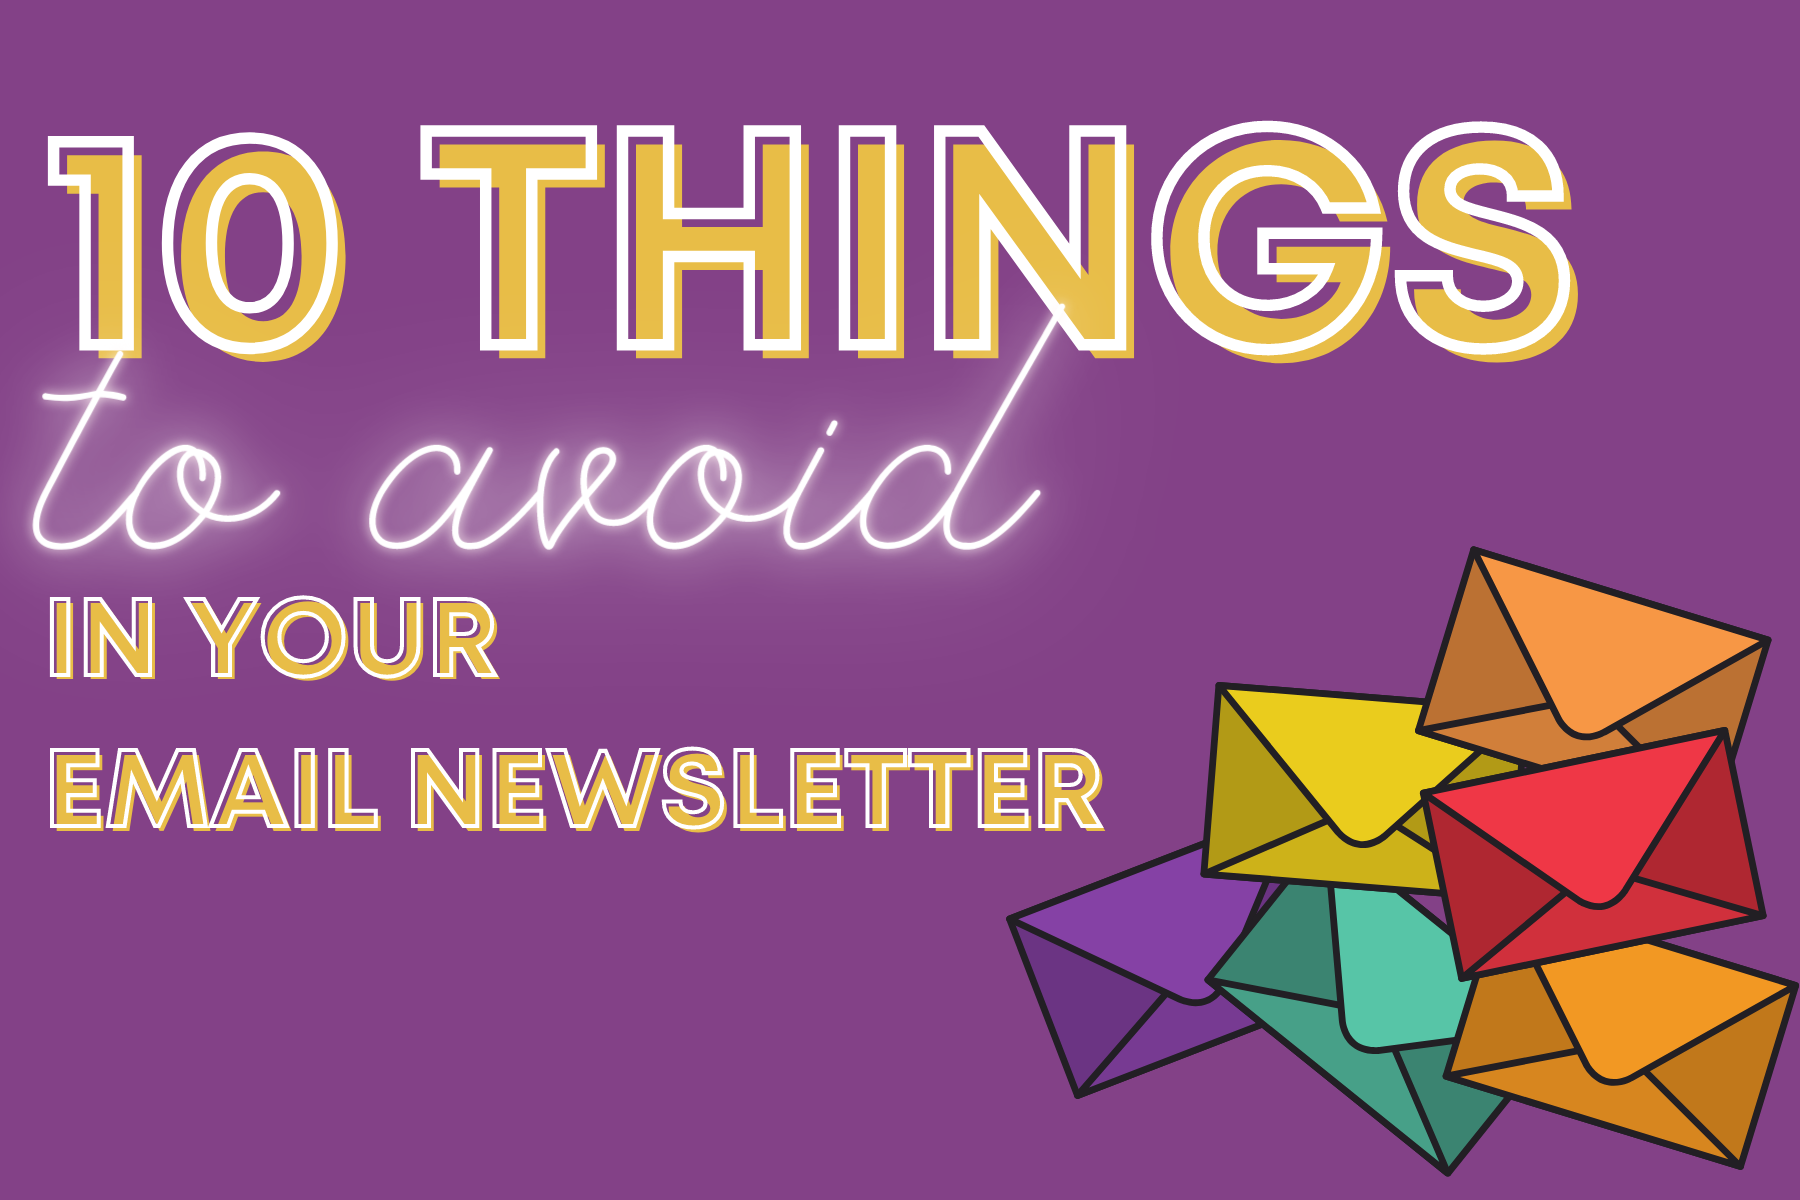 10 things to avoid in your email newsletter